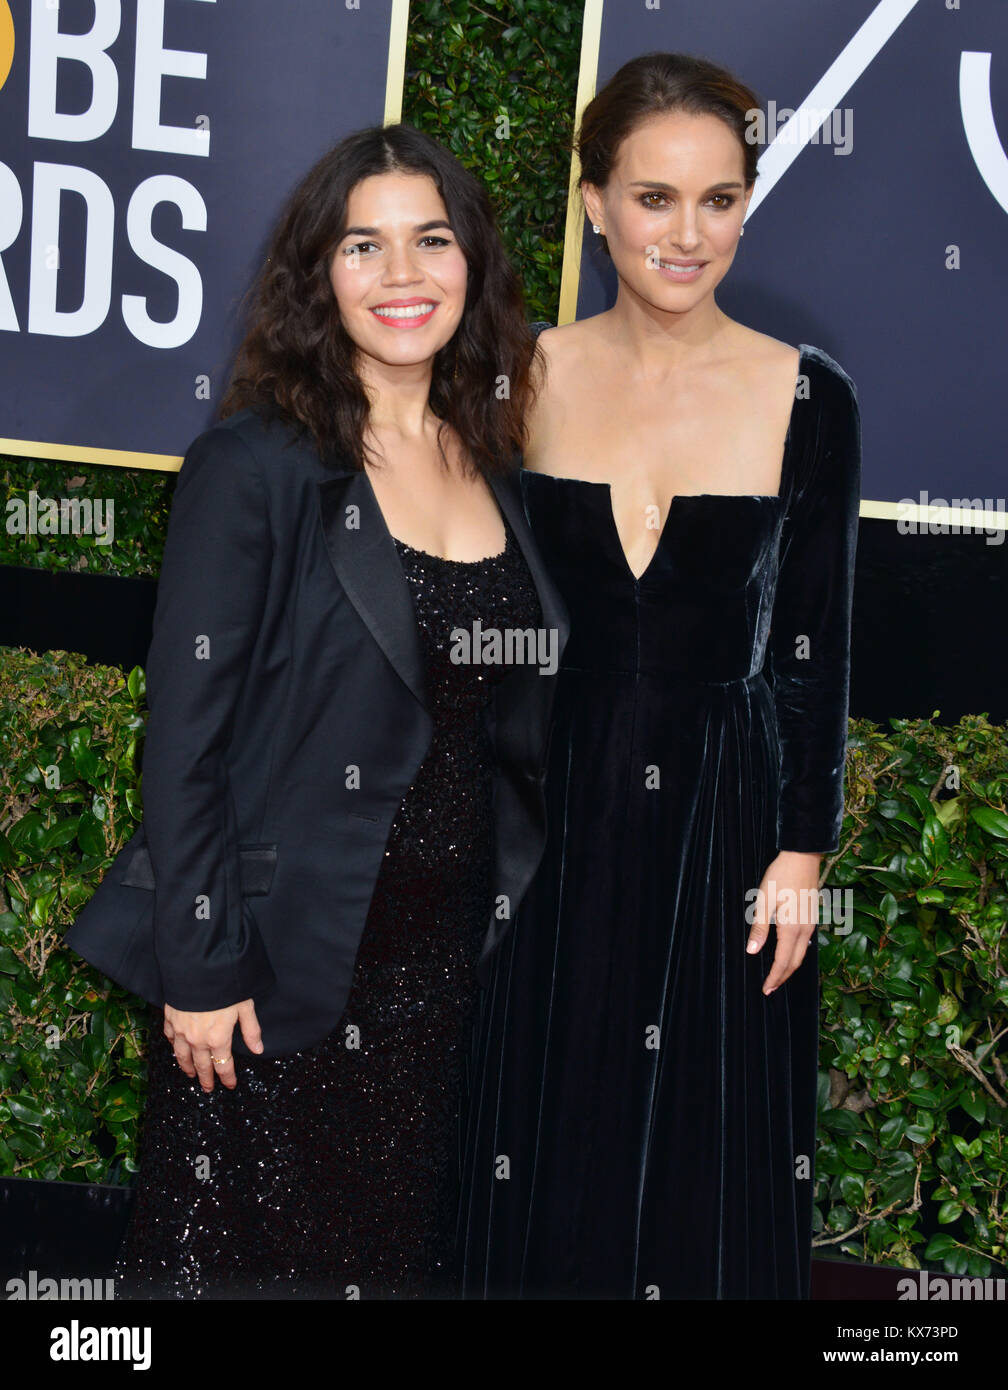 Beverly Hills, California, USA. 07th Jan, 2018. America Ferrera, Nathalie Portman 082 attends the 75th Annual Golden Globe Awards ceremony at the Beverly Hilton Hotel in Beverly Hills. CA. January the 2018 Credit: Tsuni / USA/Alamy Live News Stock Photo